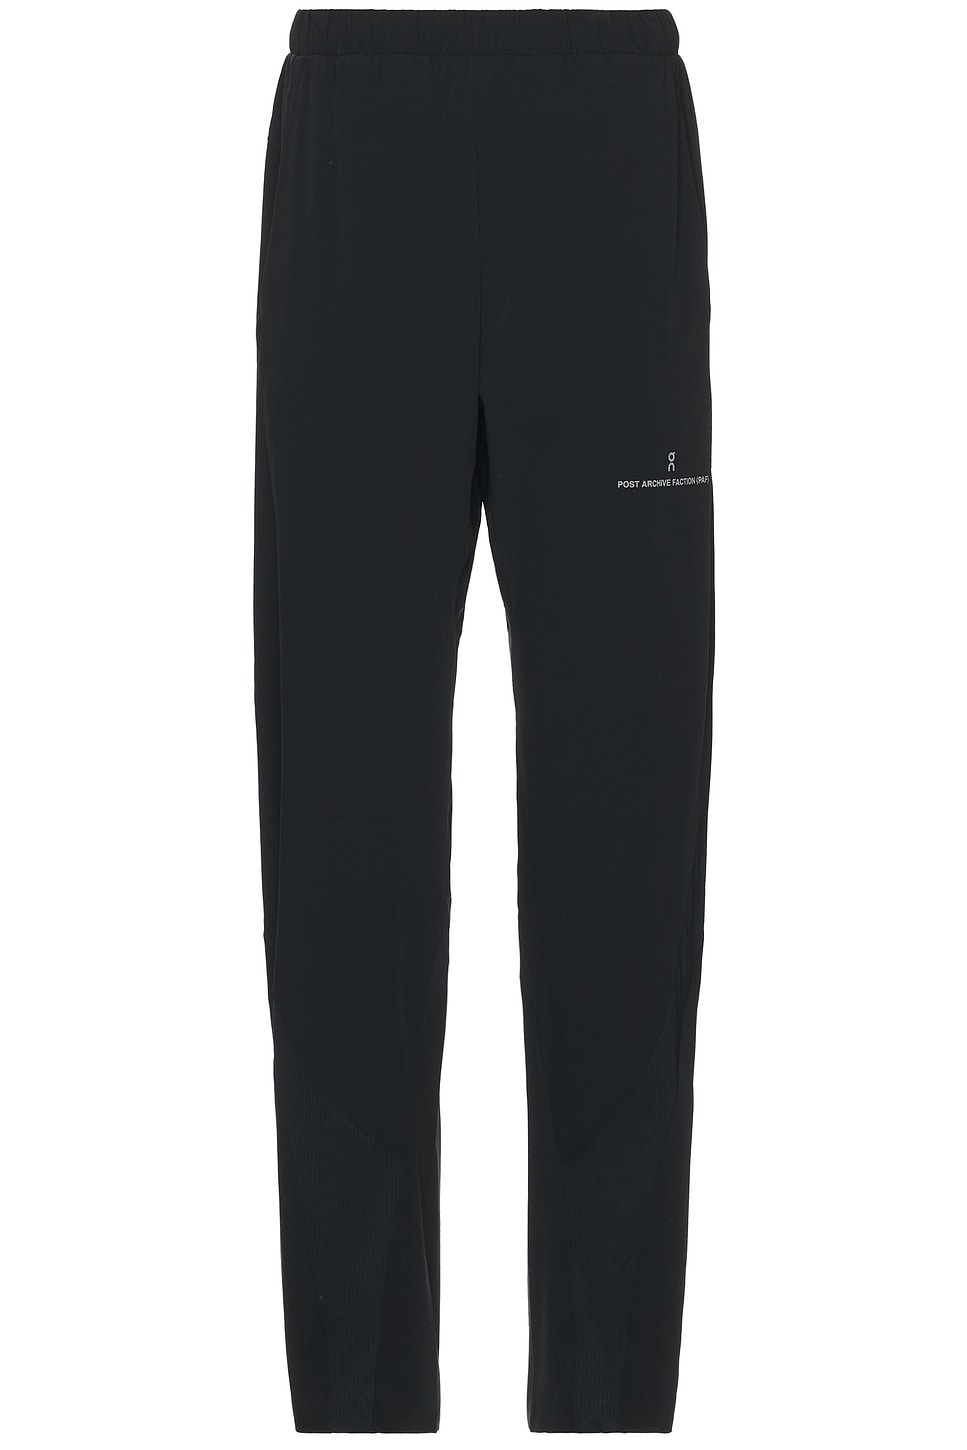 x Post Archive Faction (PAF) Running Pants in Black